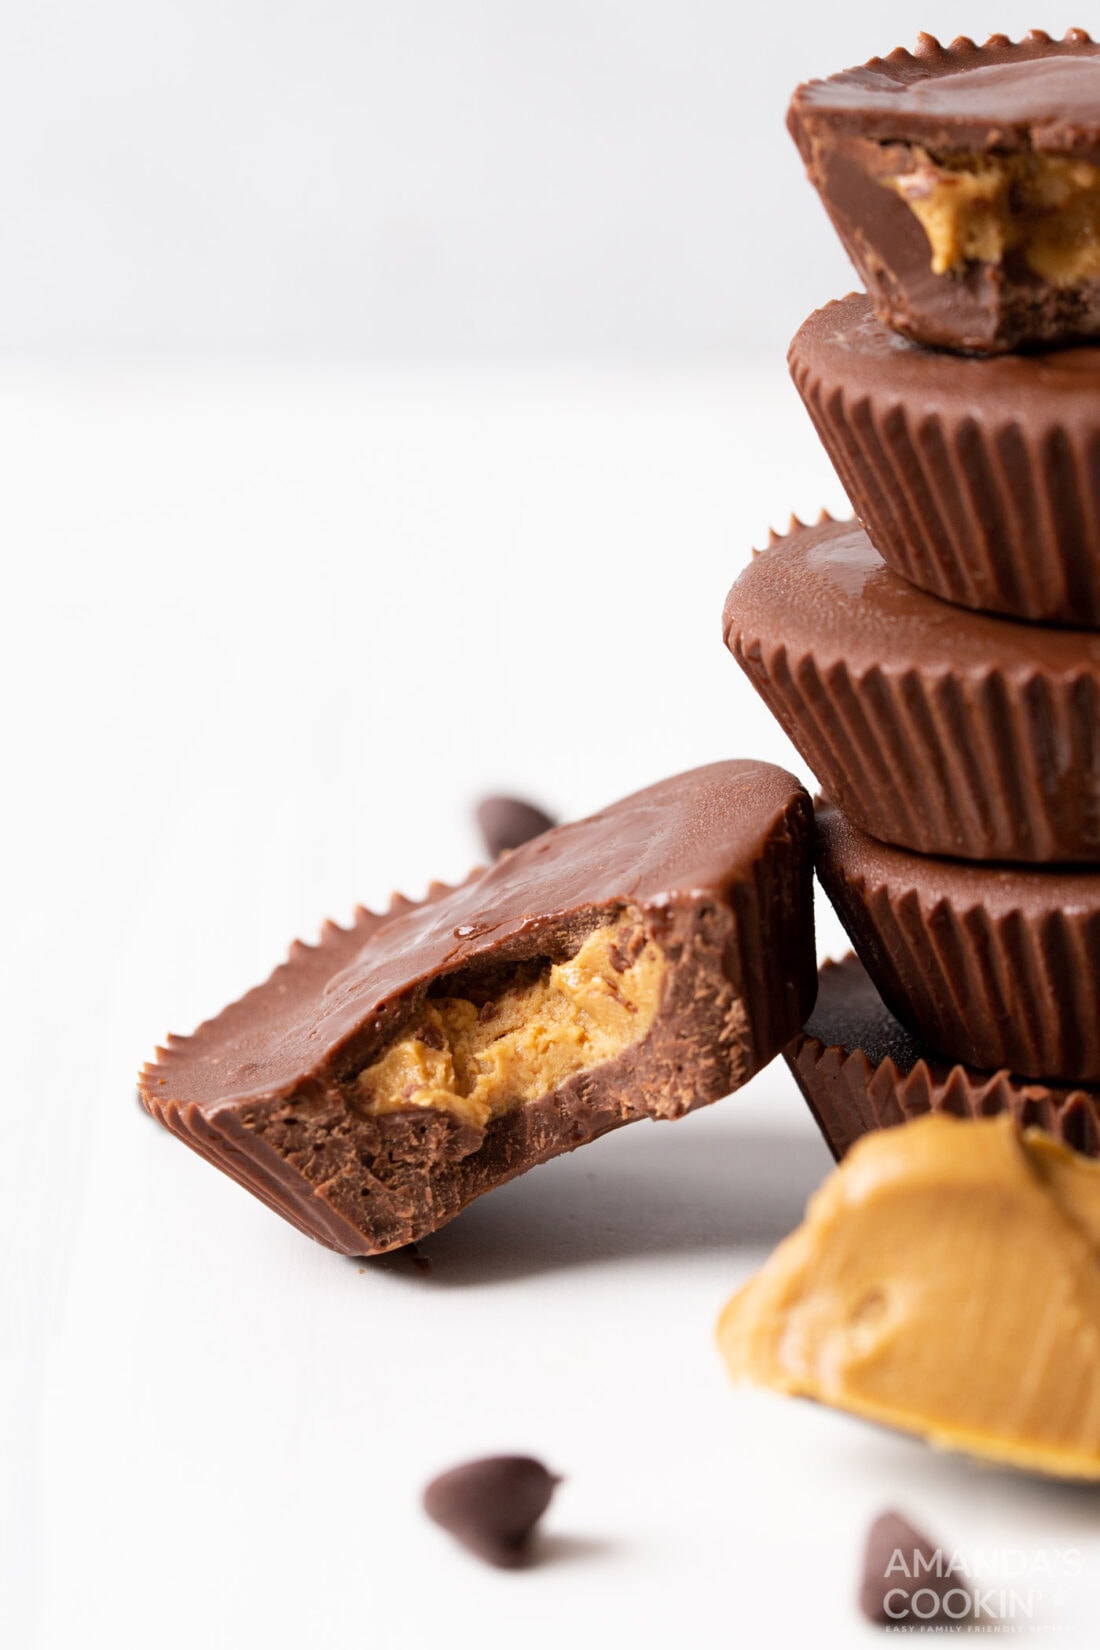 Peanut Butter Cup with a bite out of it